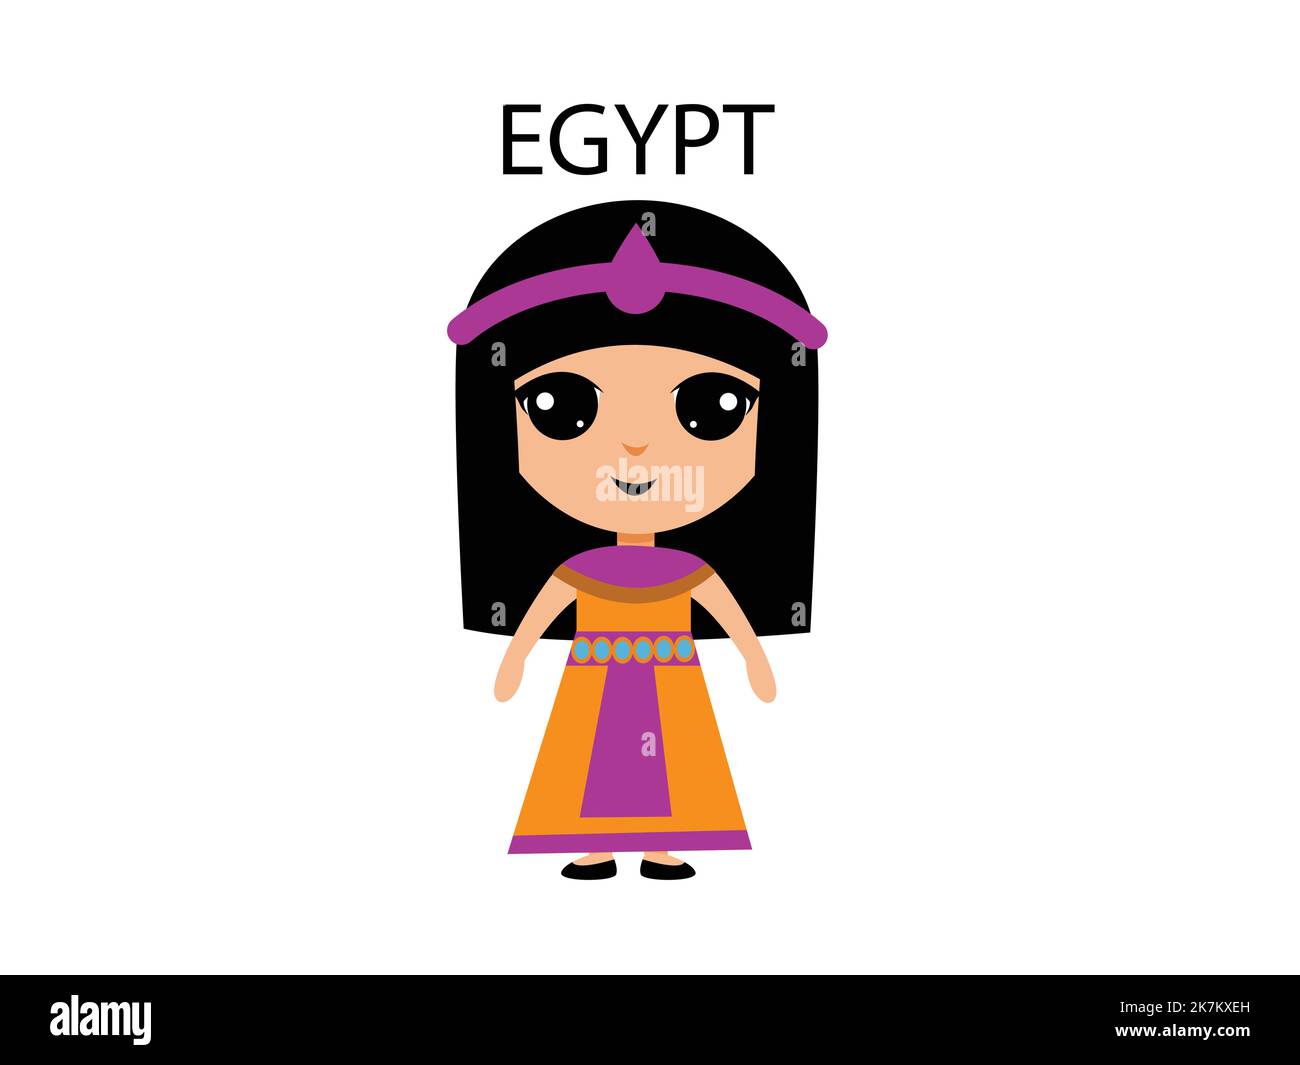 egypt girl wearing traditional outfit cartoon character illustration Stock Vector